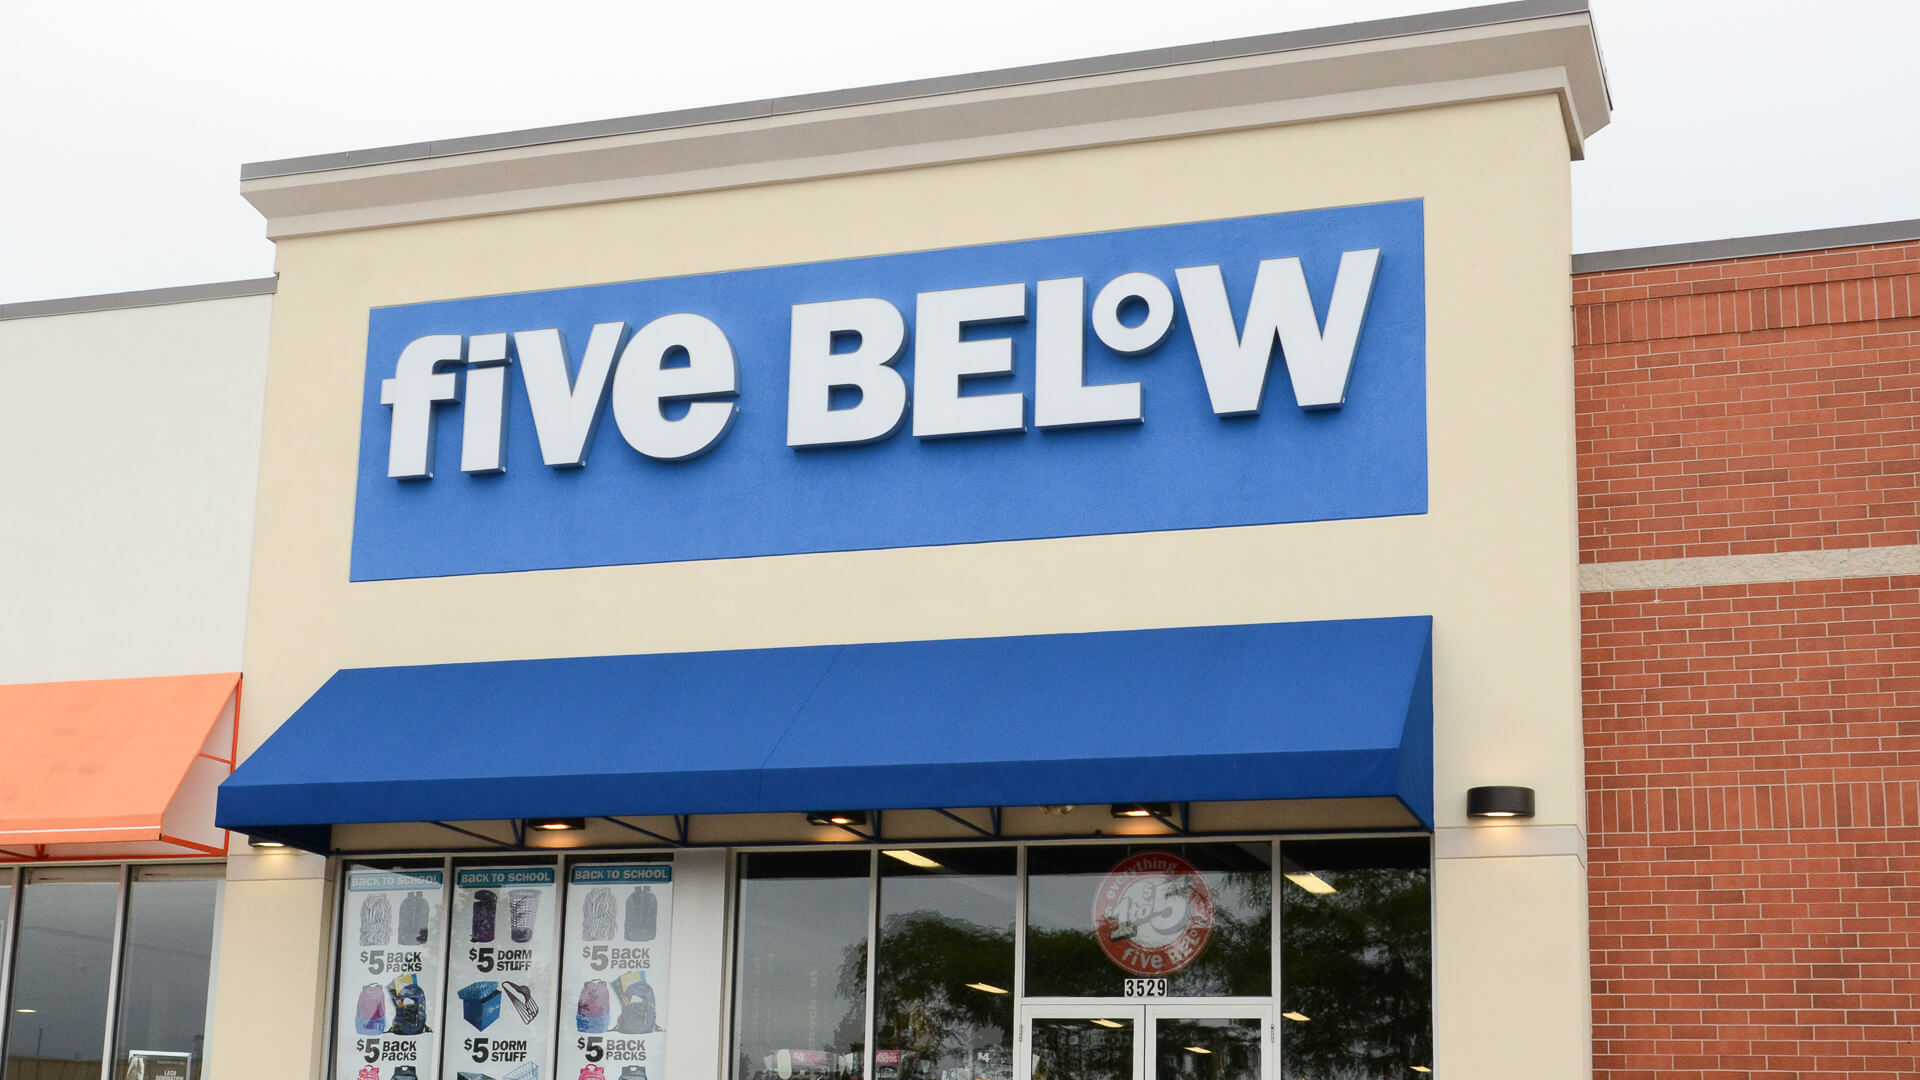 See what you can find at Five Below for $5 or less